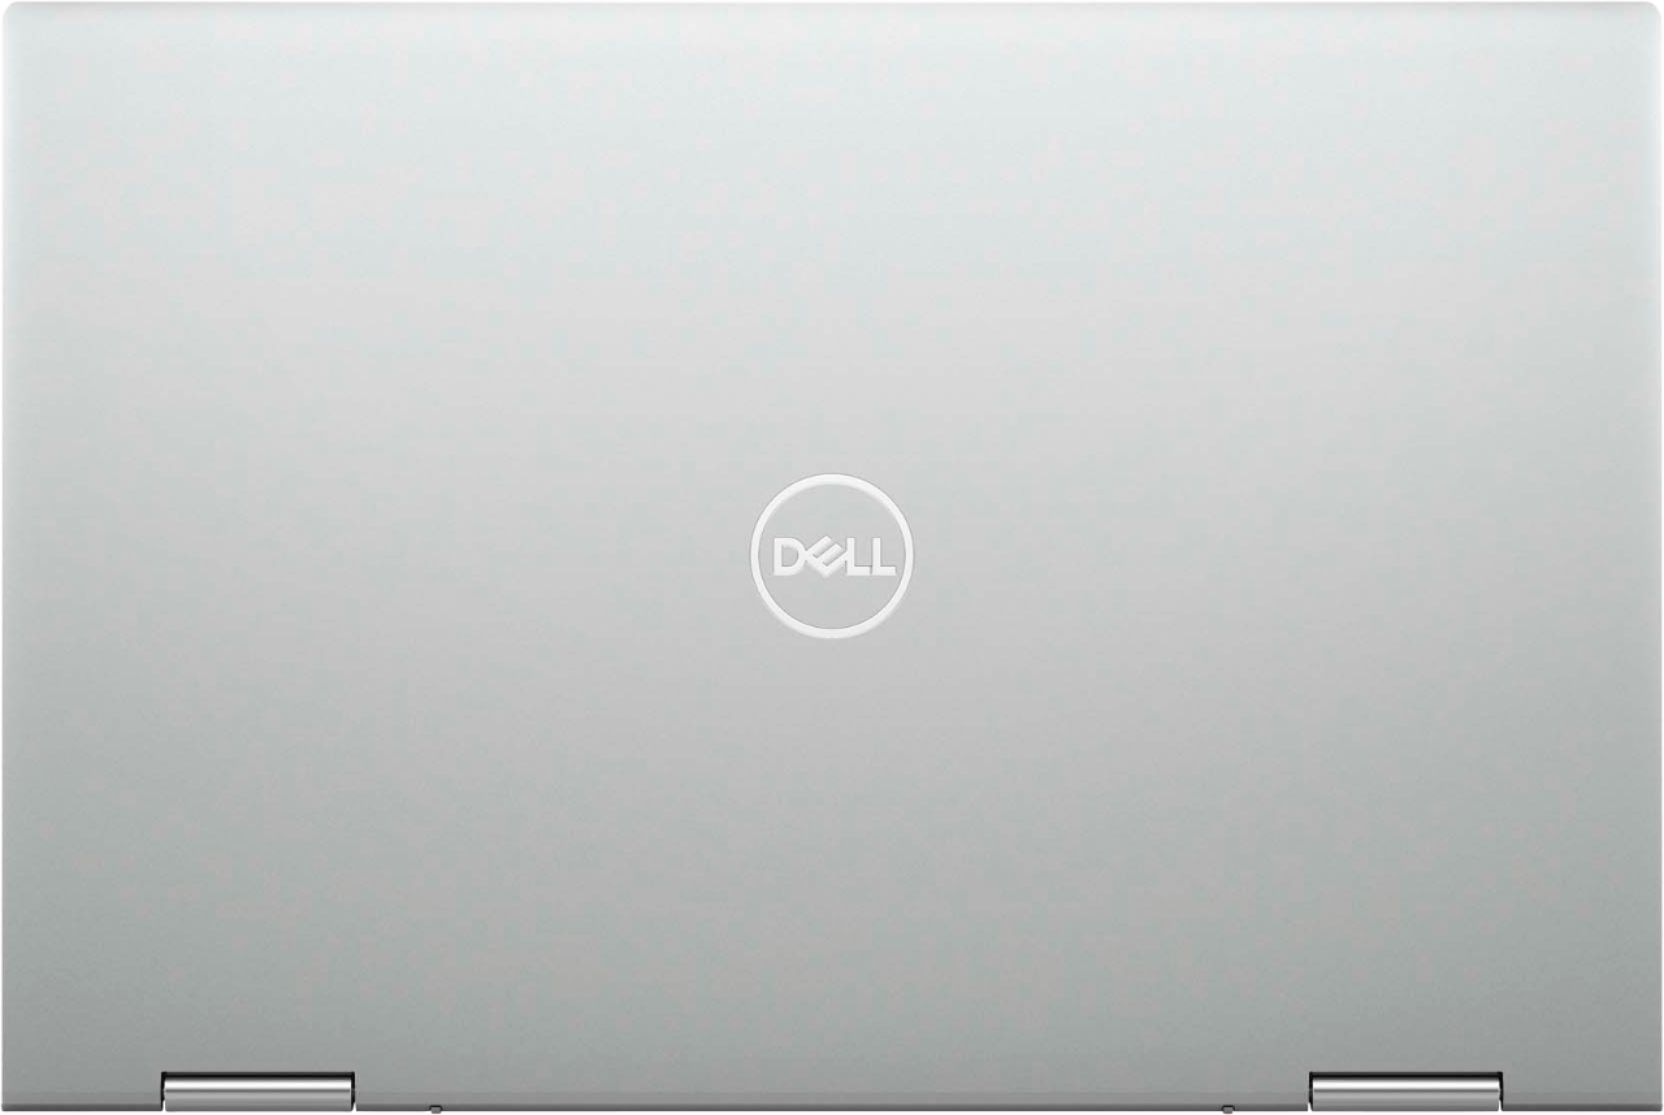 Dell Inspiron 7000 2 In 1 15 6 Fhd Touch Laptop 11th Gen Intel Core I7 16gb Ram 512gb Ssd 32gb Optane Silver I7506 7958slv Pus Best Buy